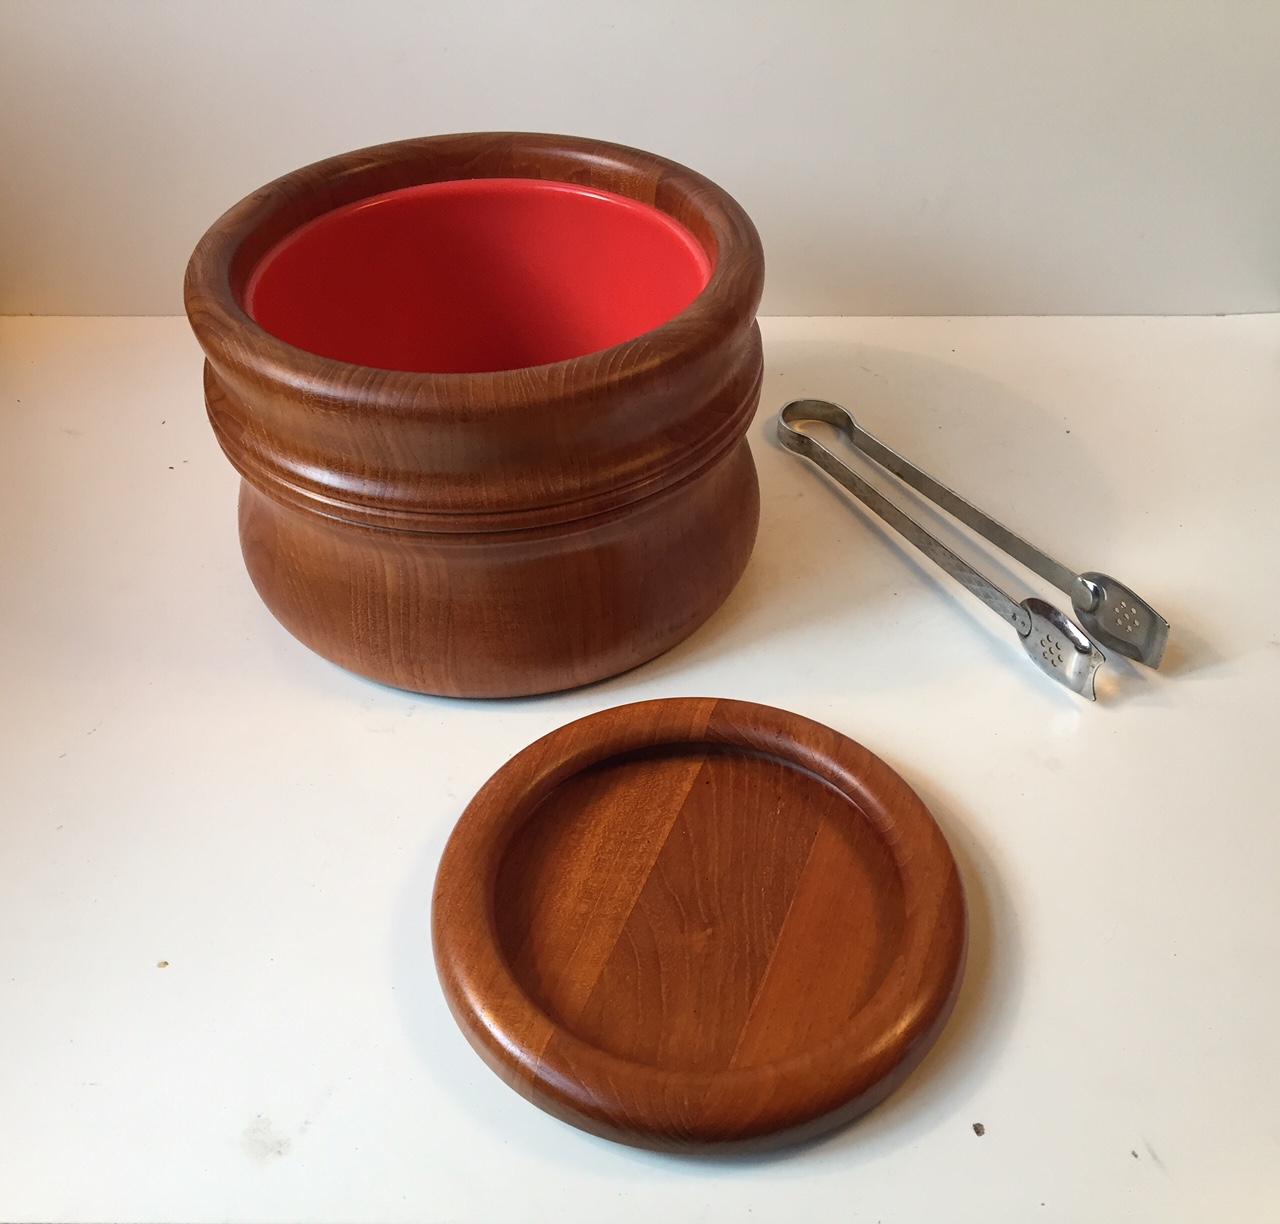 1960s teak ice bucket designed by Richard Nissen for his own company Nissen in Denmark during the 1960s. Its made from organically shaped teak, its lined with orange plastic and the lid doubles as a snack bowl. Its stamped by the maker to the bottom.